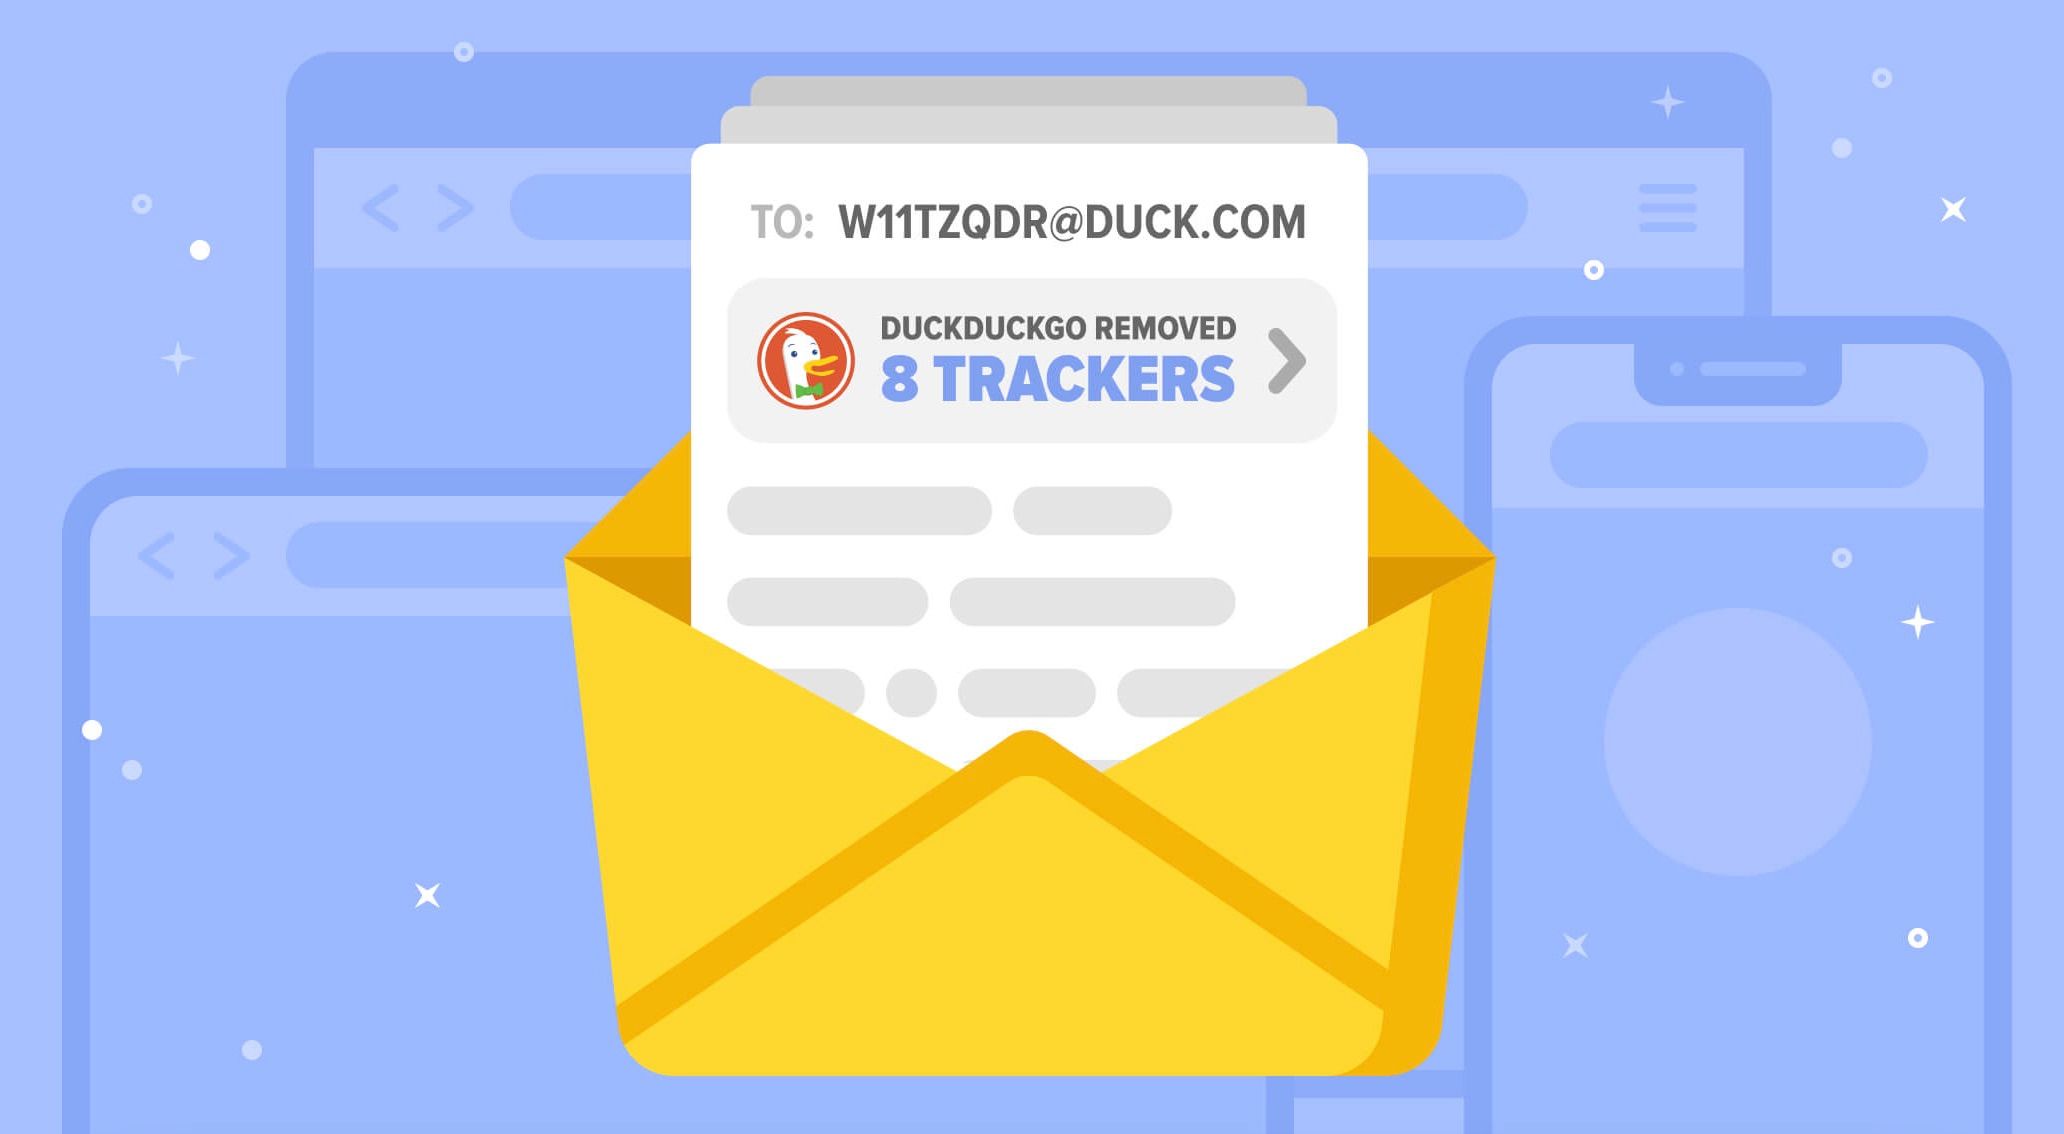 DuckDuckGo is making tracker removal for emails available to everyone